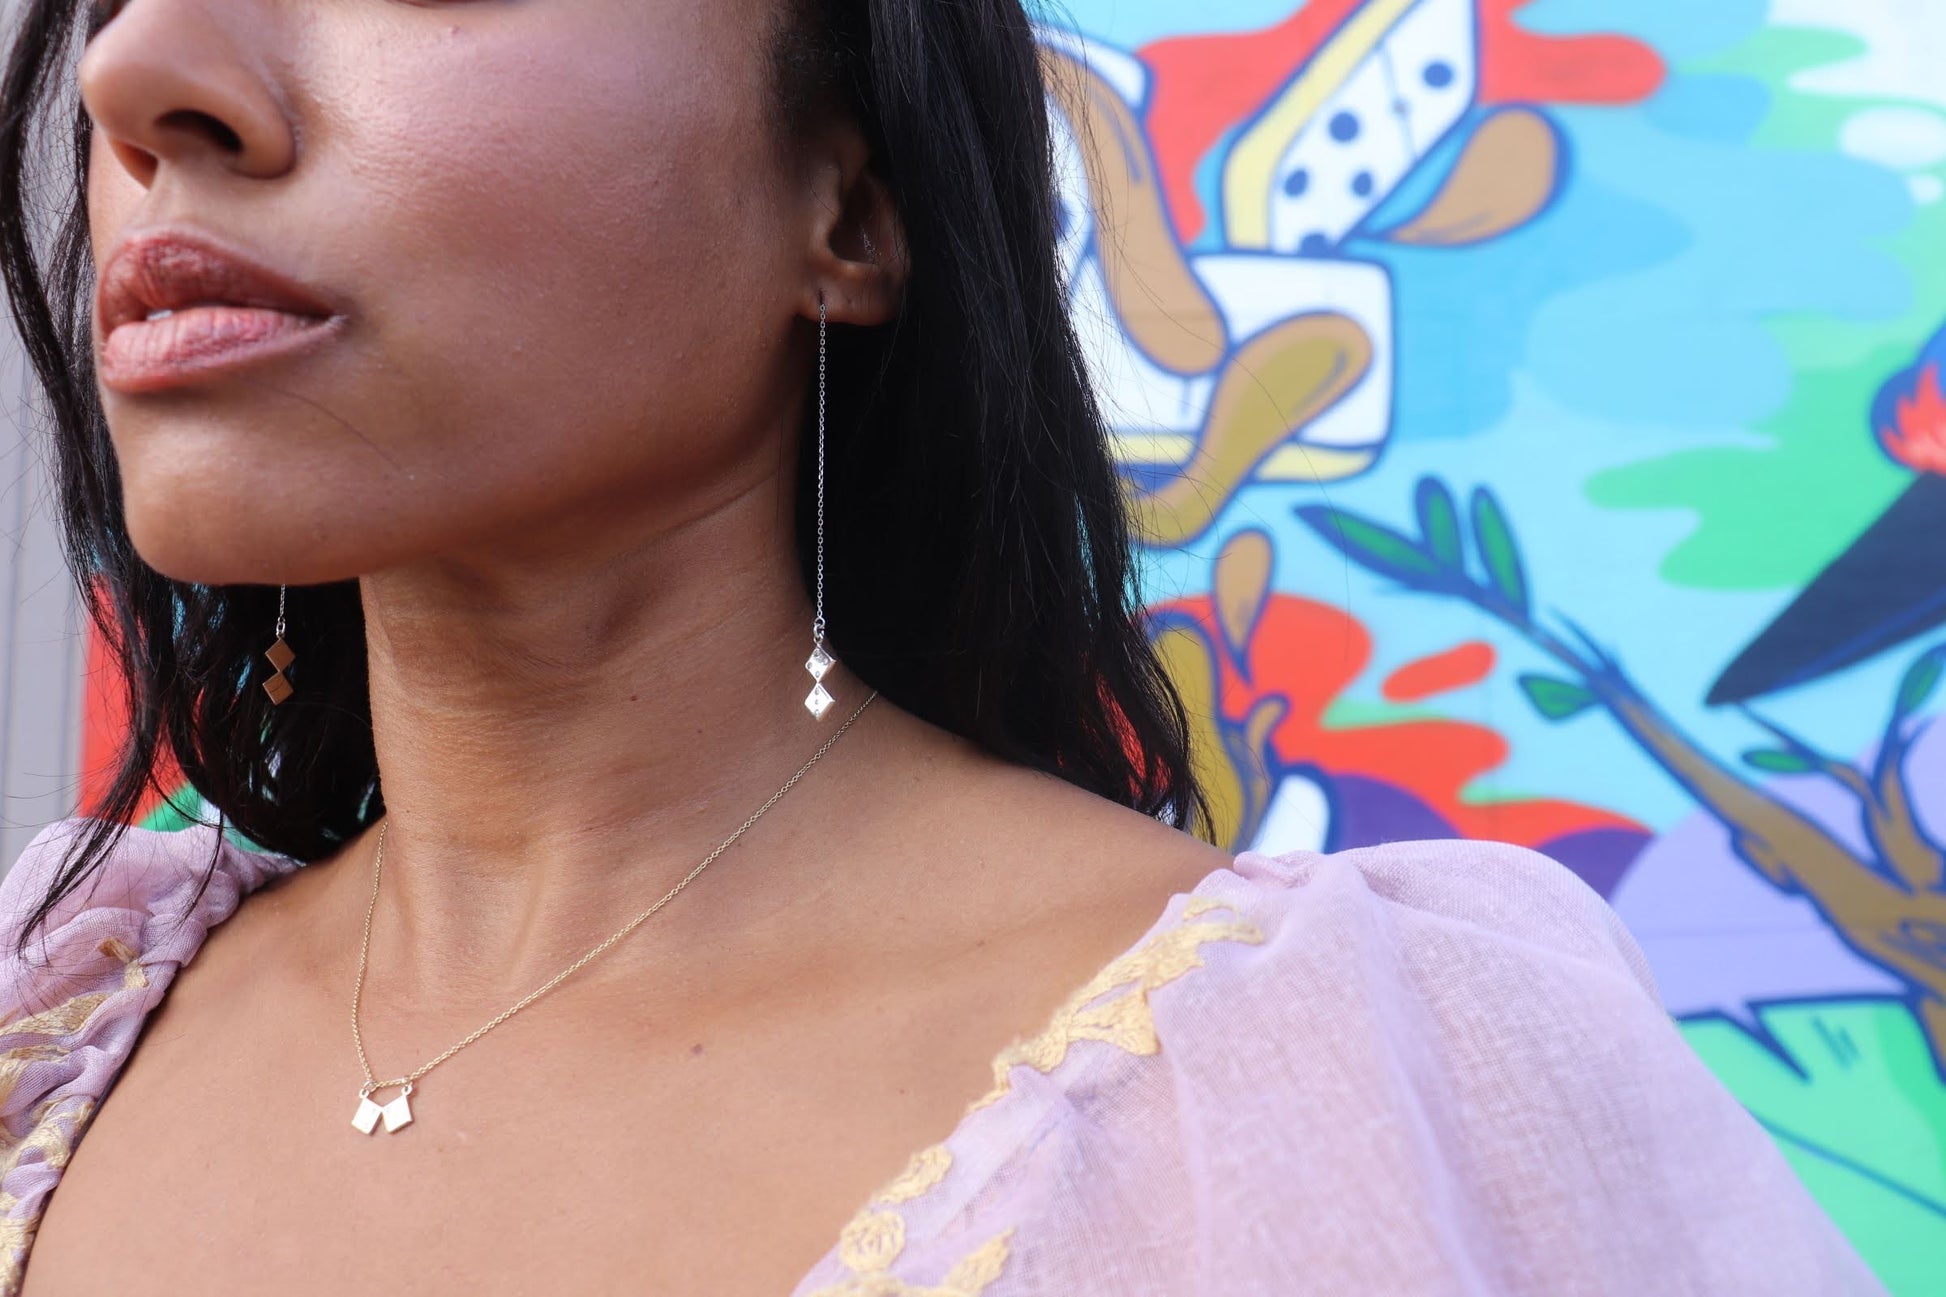 black woman in a pink puff sleeve renaissance blouse standing in front of a graffiti wall wearing dice earrings and a dice necklace